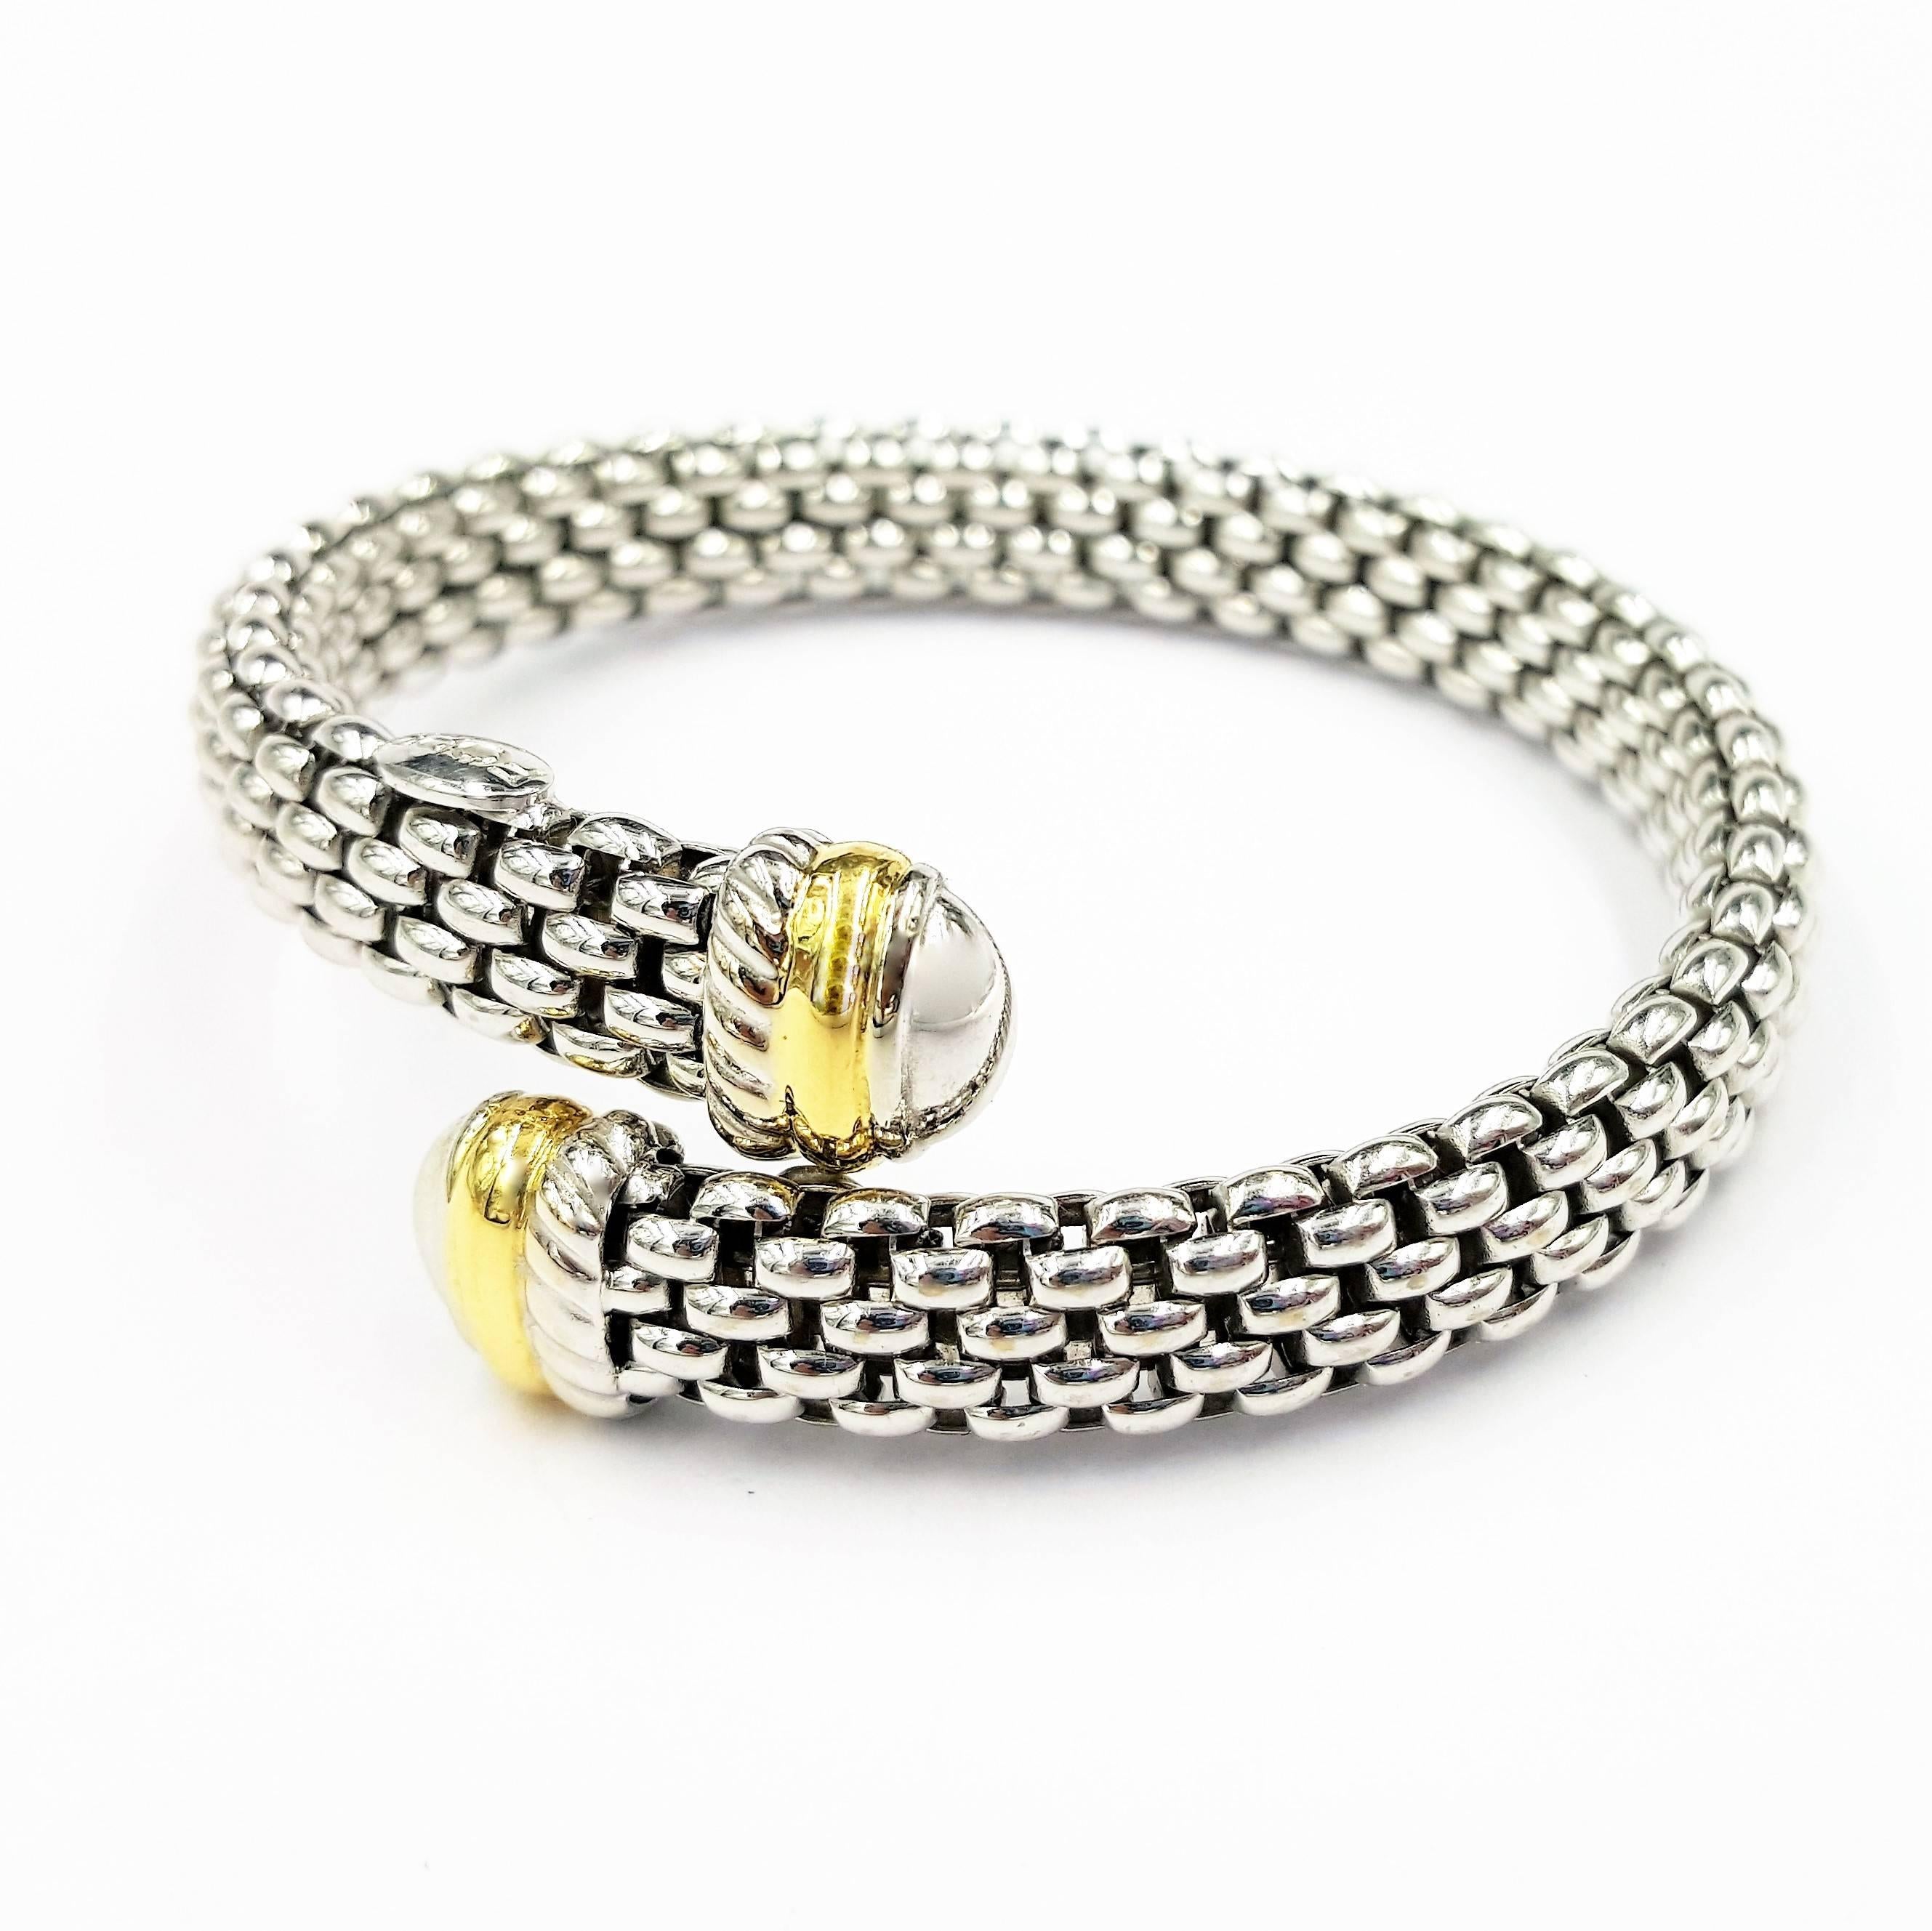 This Signed FOPE Italian Designer 18kt White and Yellow Gold Flexible Bracelet is truly stunning and makes a brilliant addition to any outfit. The bracelet itself fill fit a wide variety of wrist sizes as it is flexible and is uniquely designed by